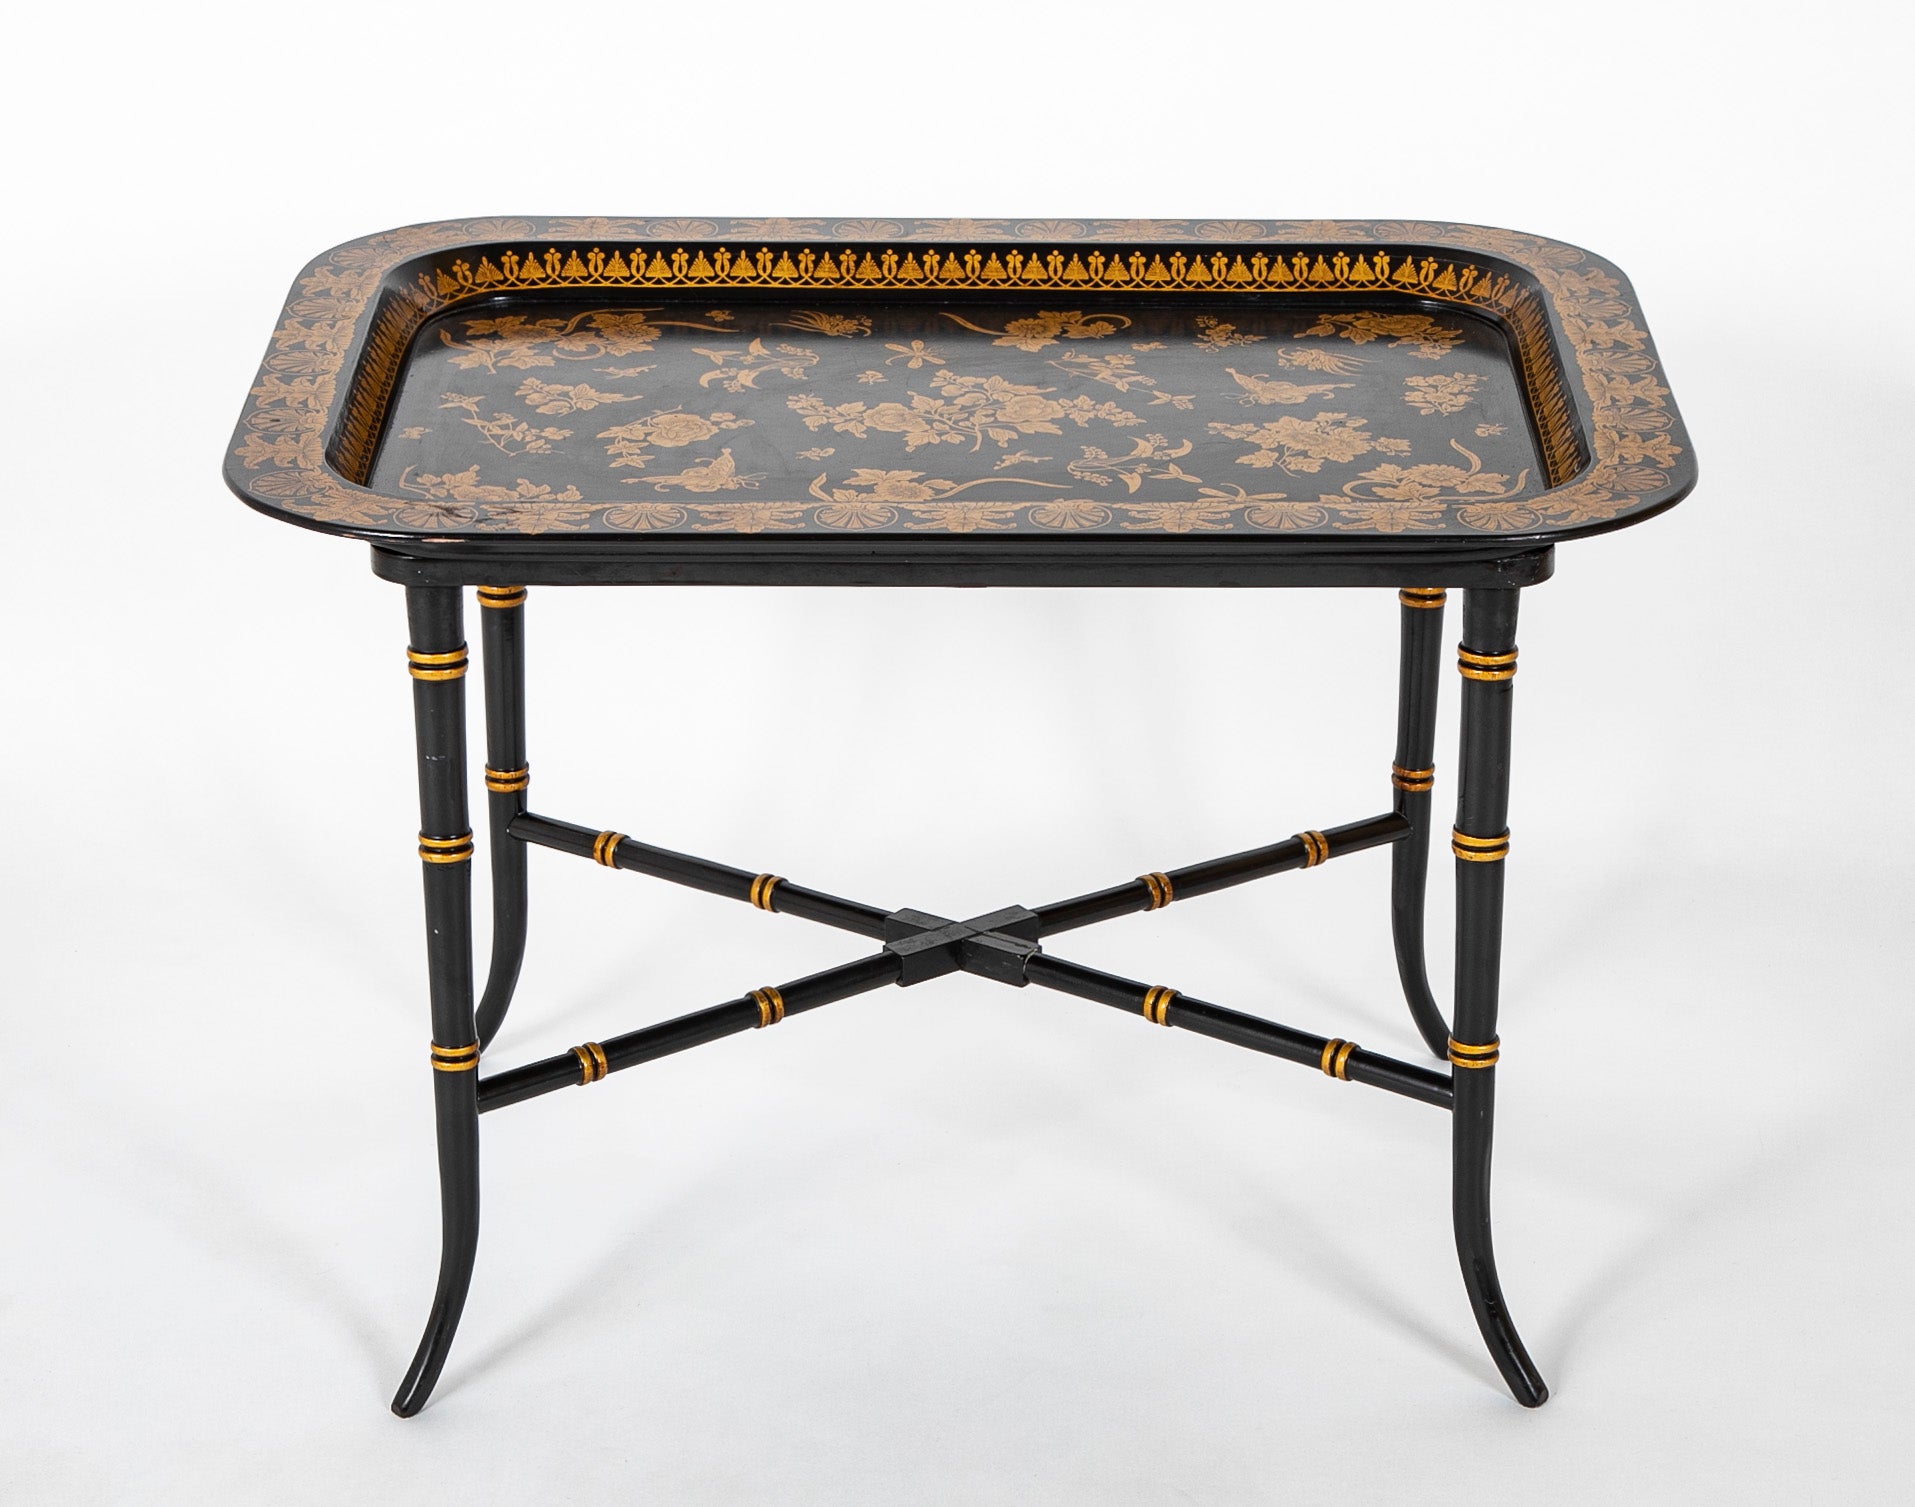 Lacquered and Gilt Decorated Papier Mache Dished Tray Table